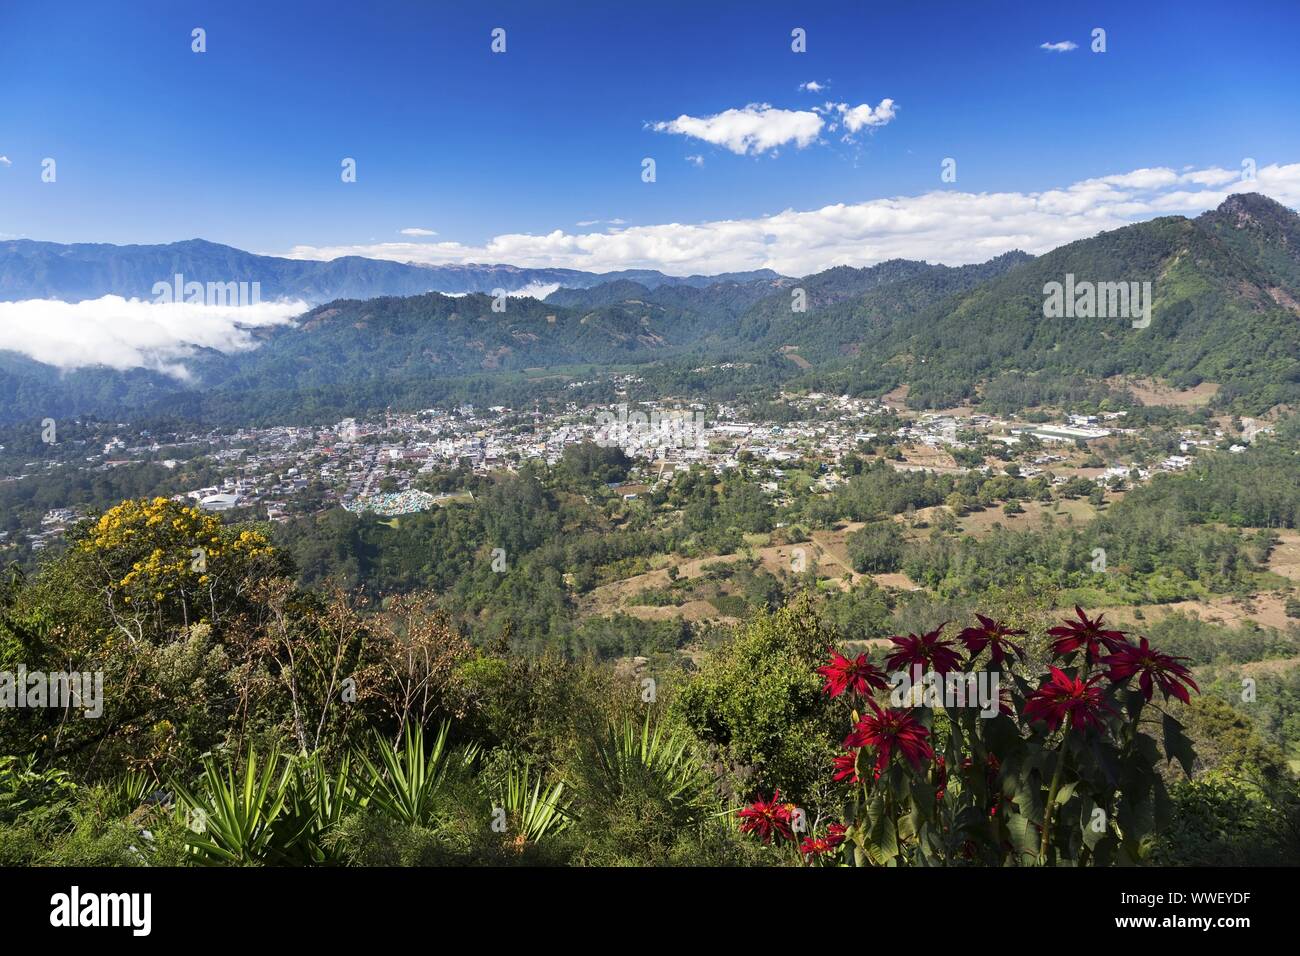 Scenic Aerial Landscape View of Guatemala Highlands, Sierra Madre Mountains and Local Village from Summit of Indian Nose Volcano above Lake Atitlan Stock Photo